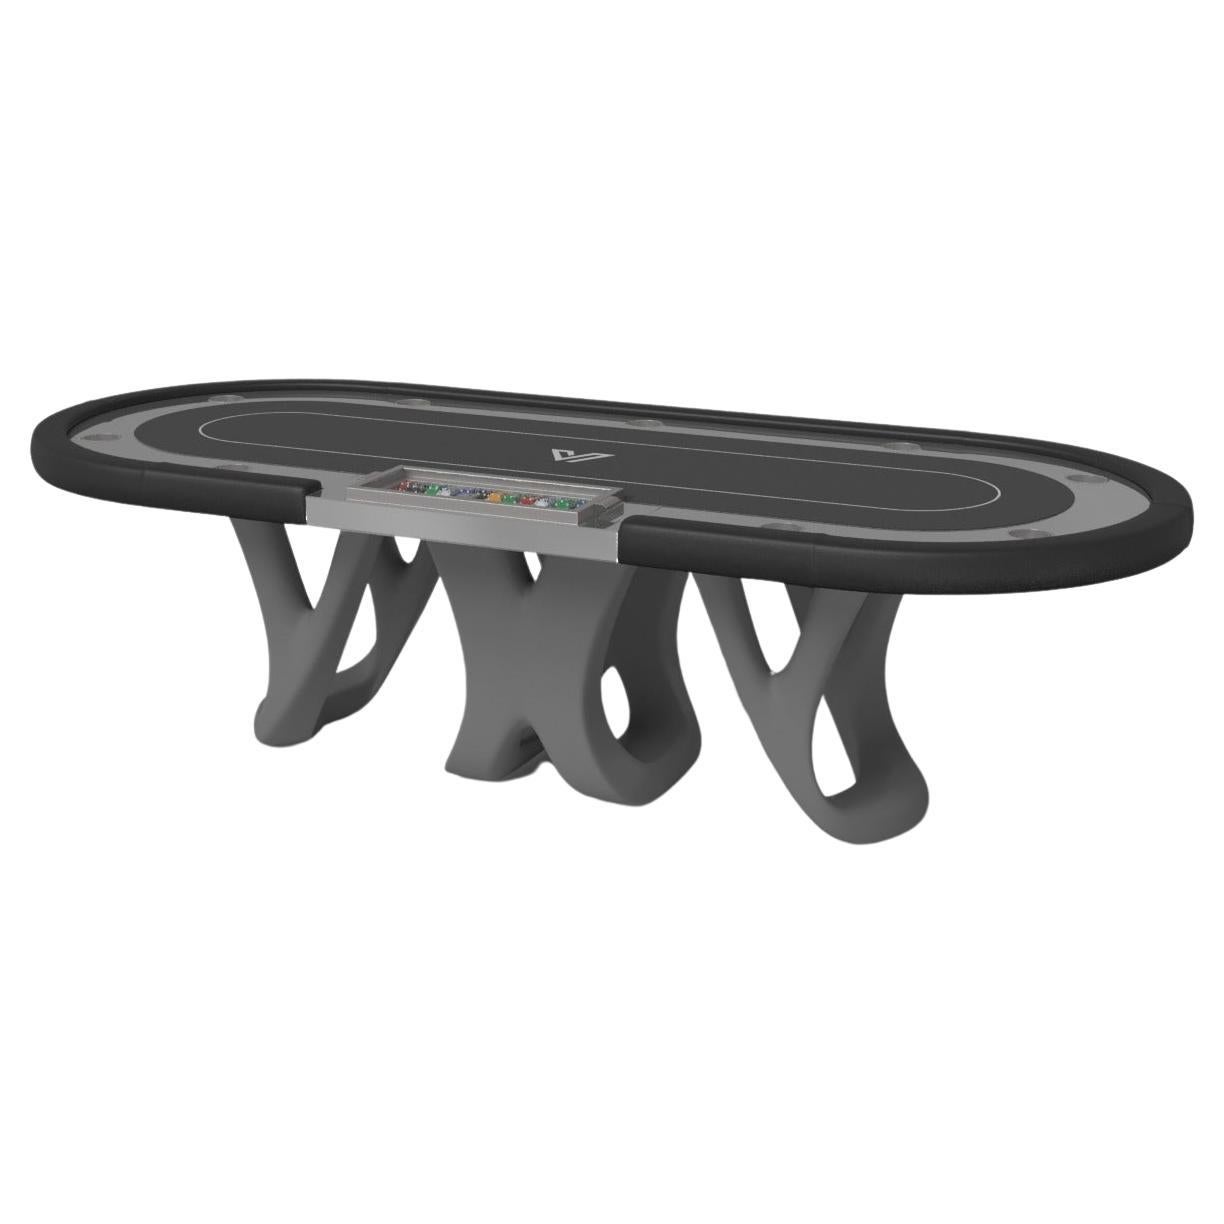 Elevate Customs Draco Poker Tables / Stainless Steel Sheet Metal in 8'8" - USA